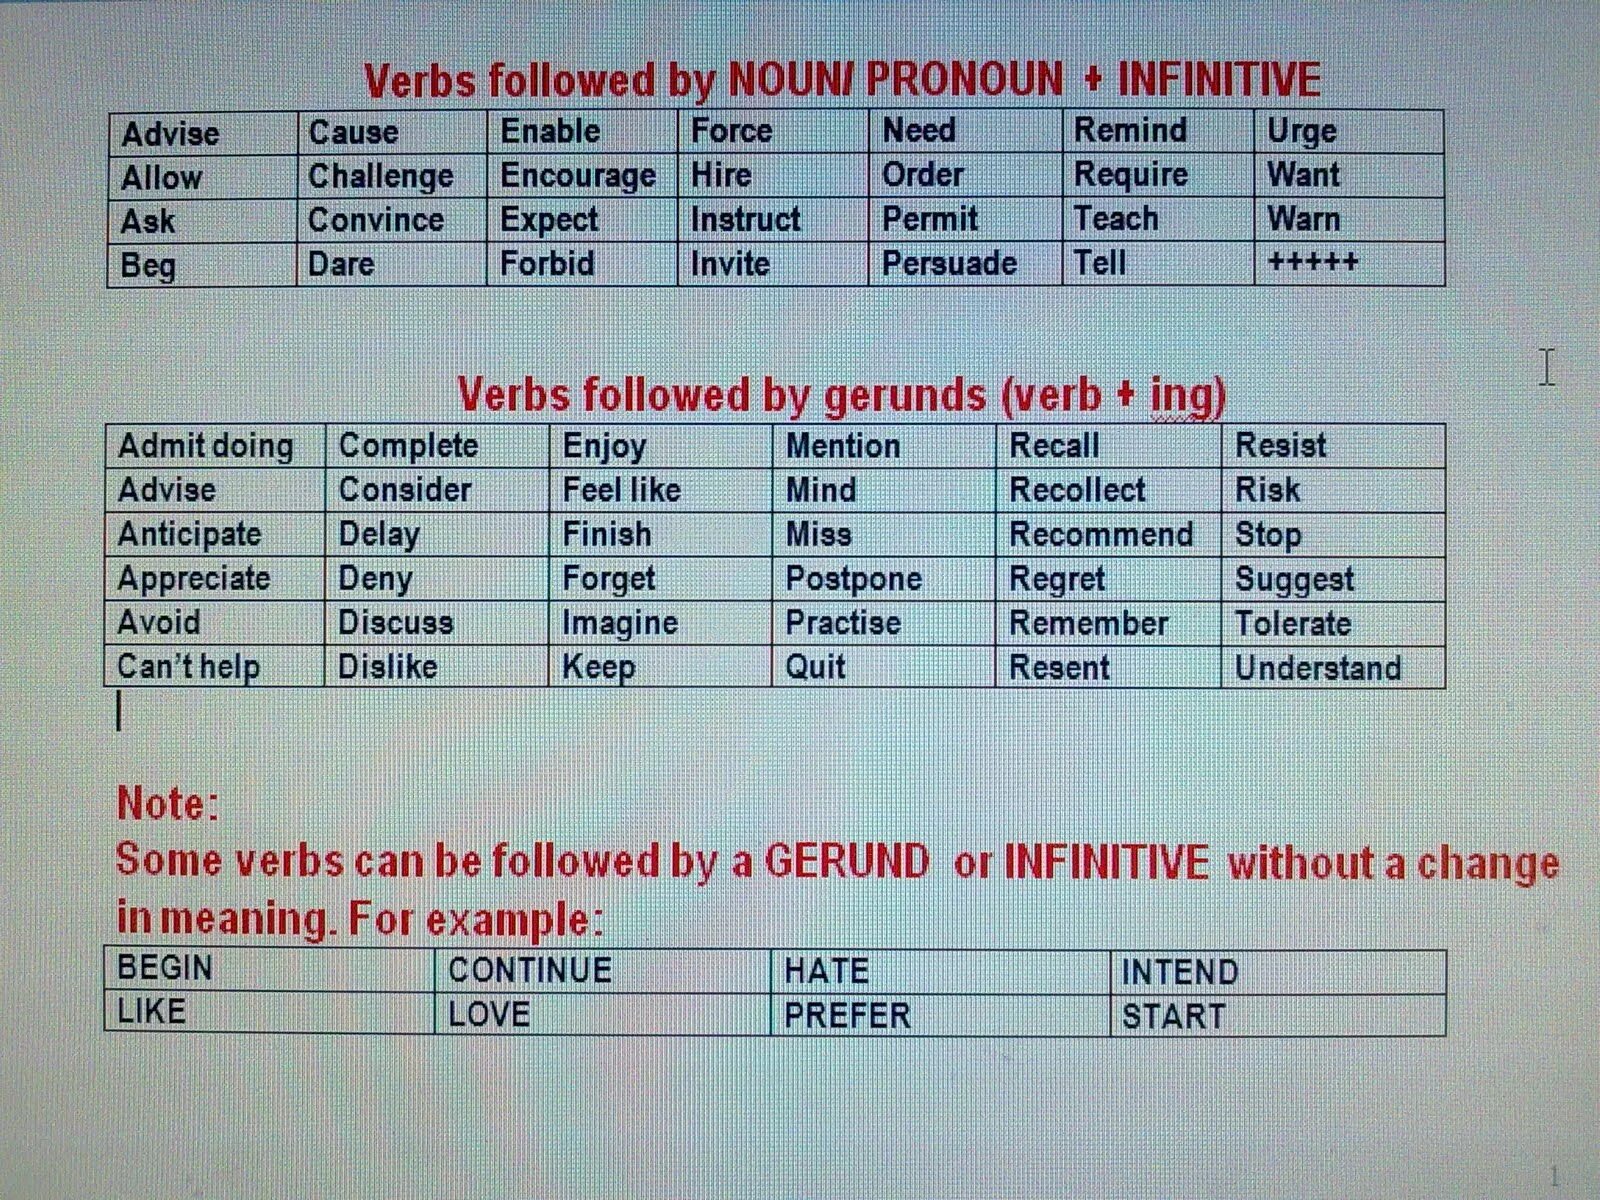 Allow to do or doing. Verb ing verb Infinitive таблицы. Infinitive verbs list. Английские глаголы с to и ing. Infinitives verbs правило.